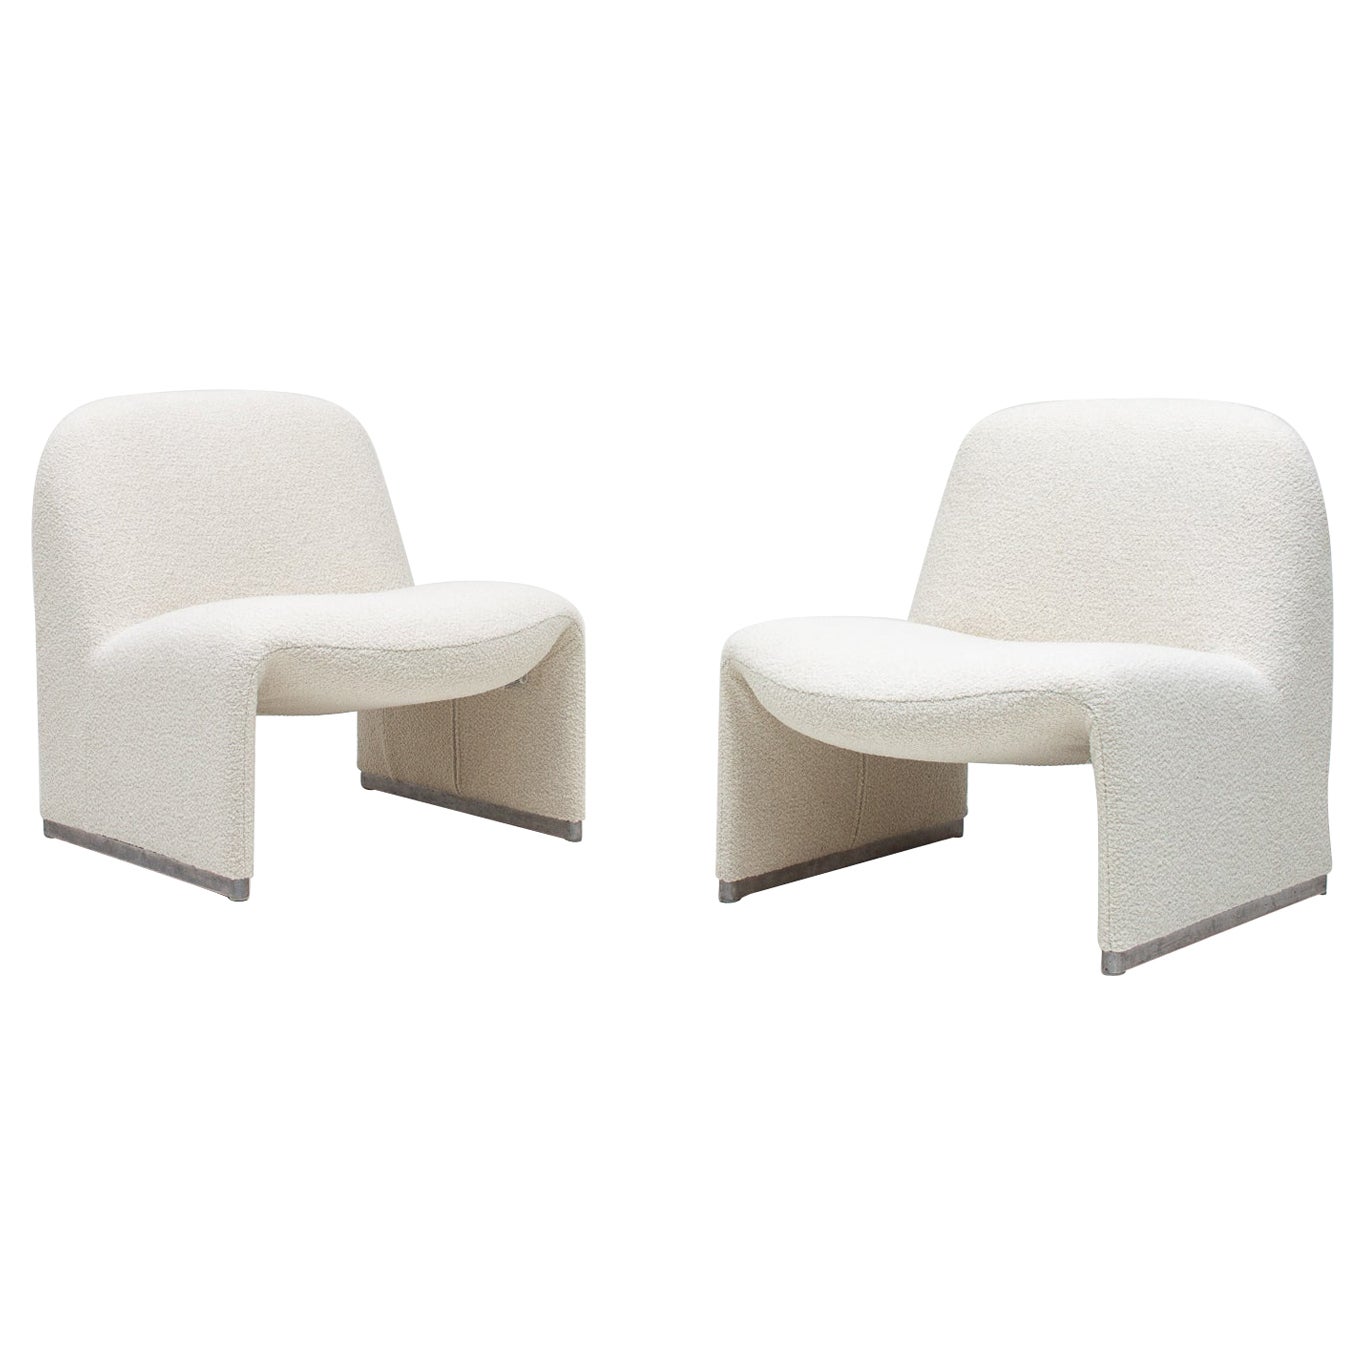 Giancarlo Piretti Alky Chairs In Yarn Collective bouclé *Personnalisable* en vente